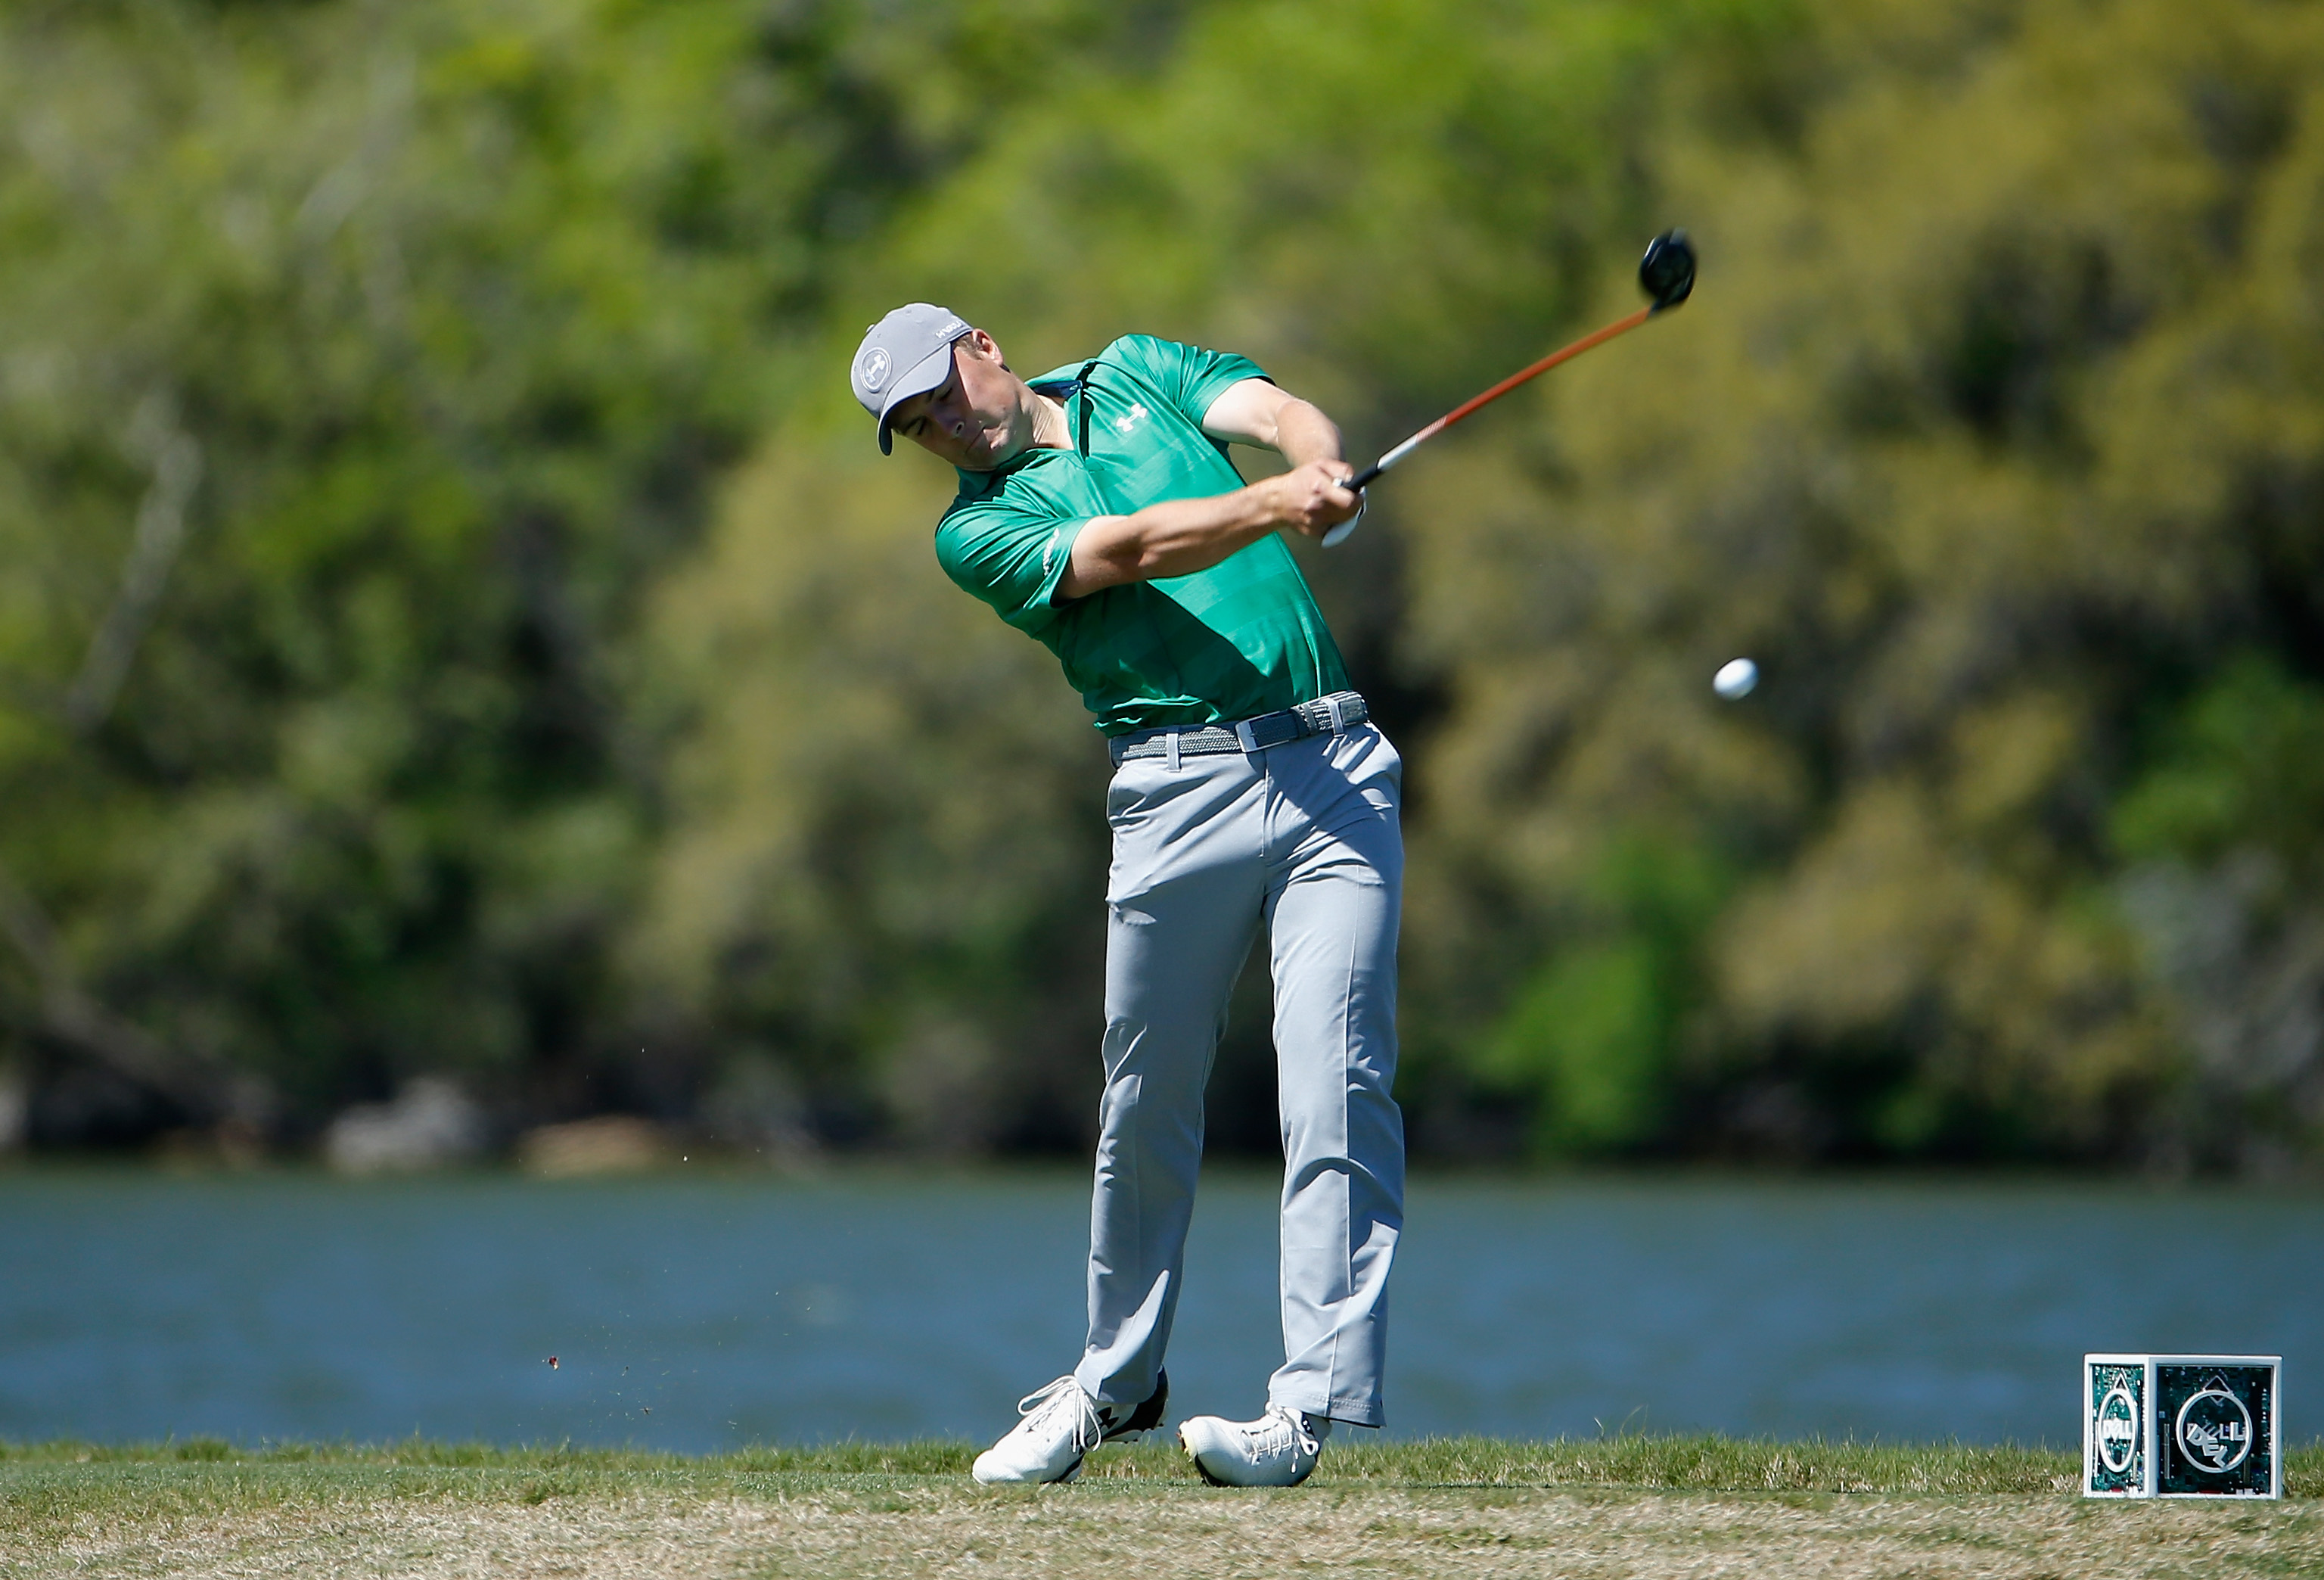 Jordan Spieth loses to Montgomery, now is in danger at Dell Match Play